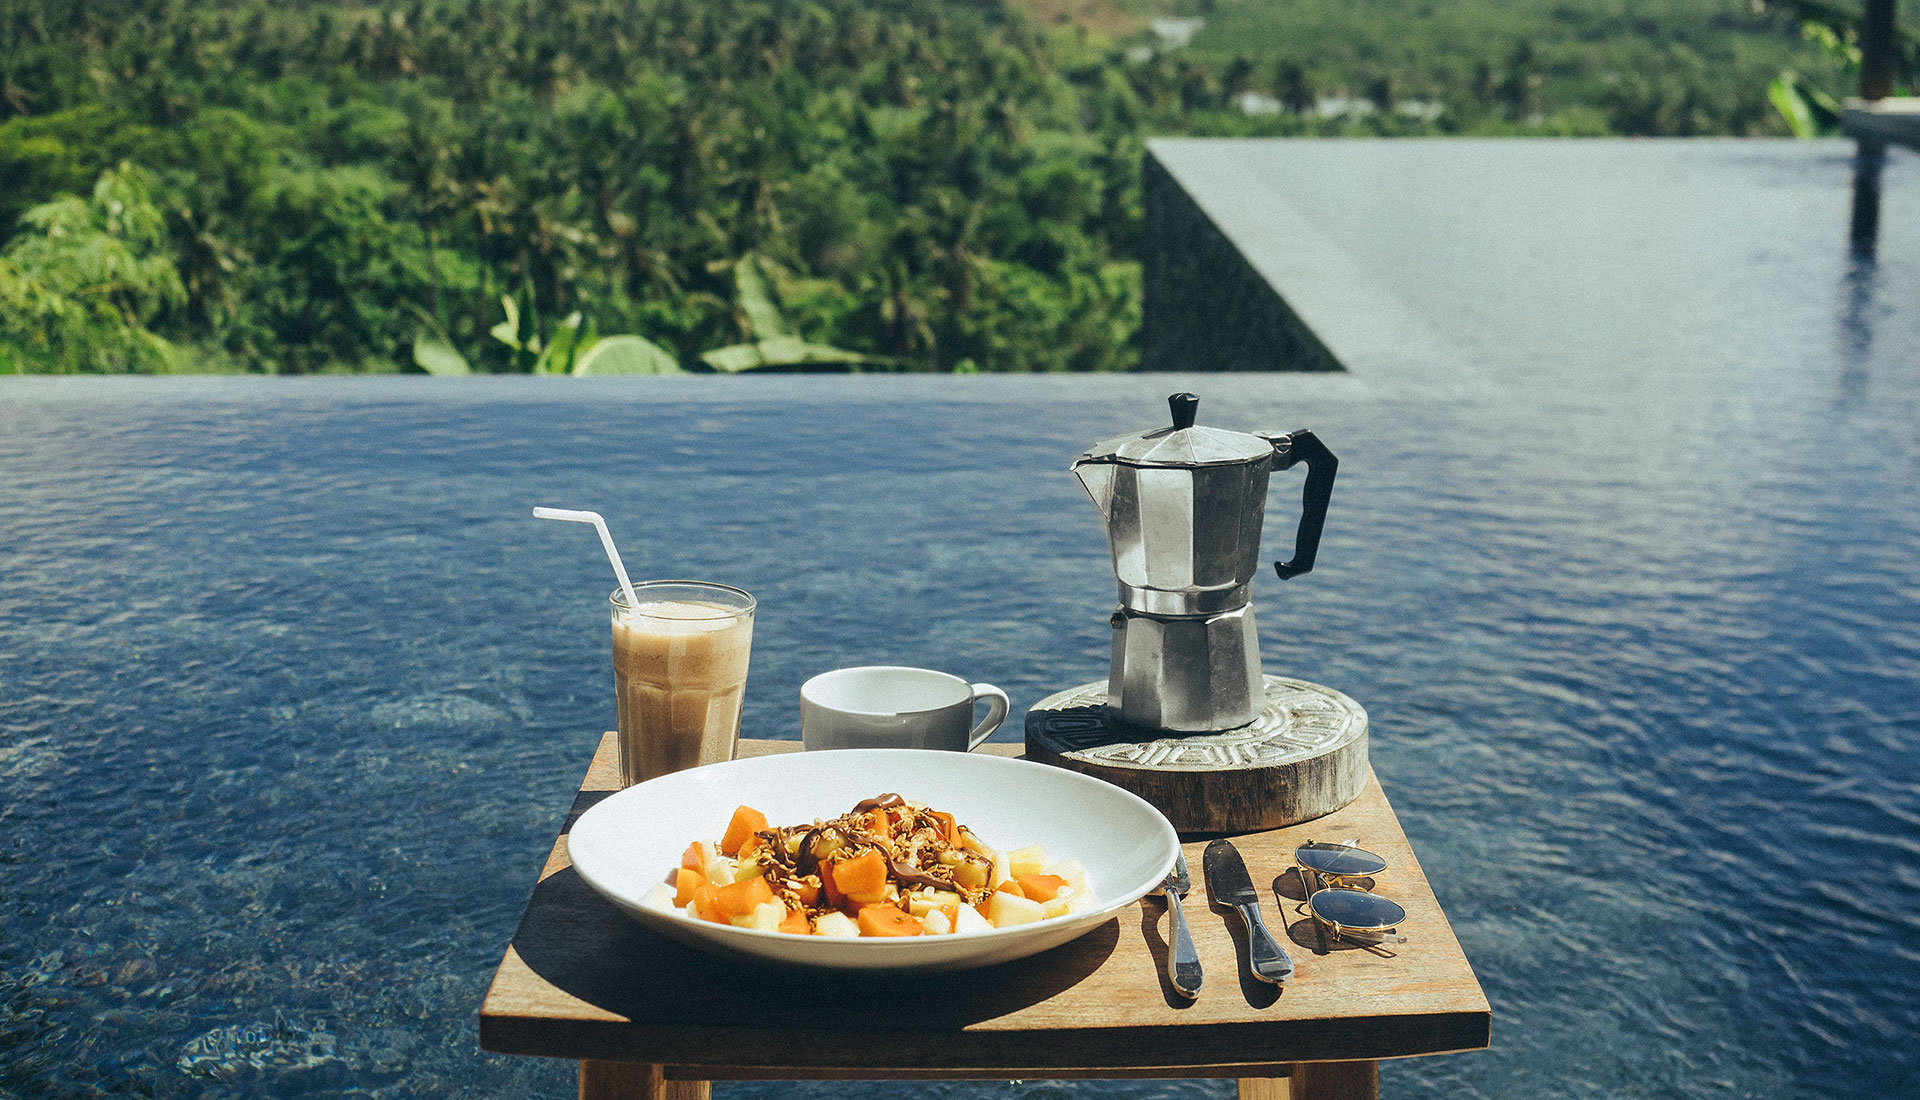 Tampah Hills breakfast with a view